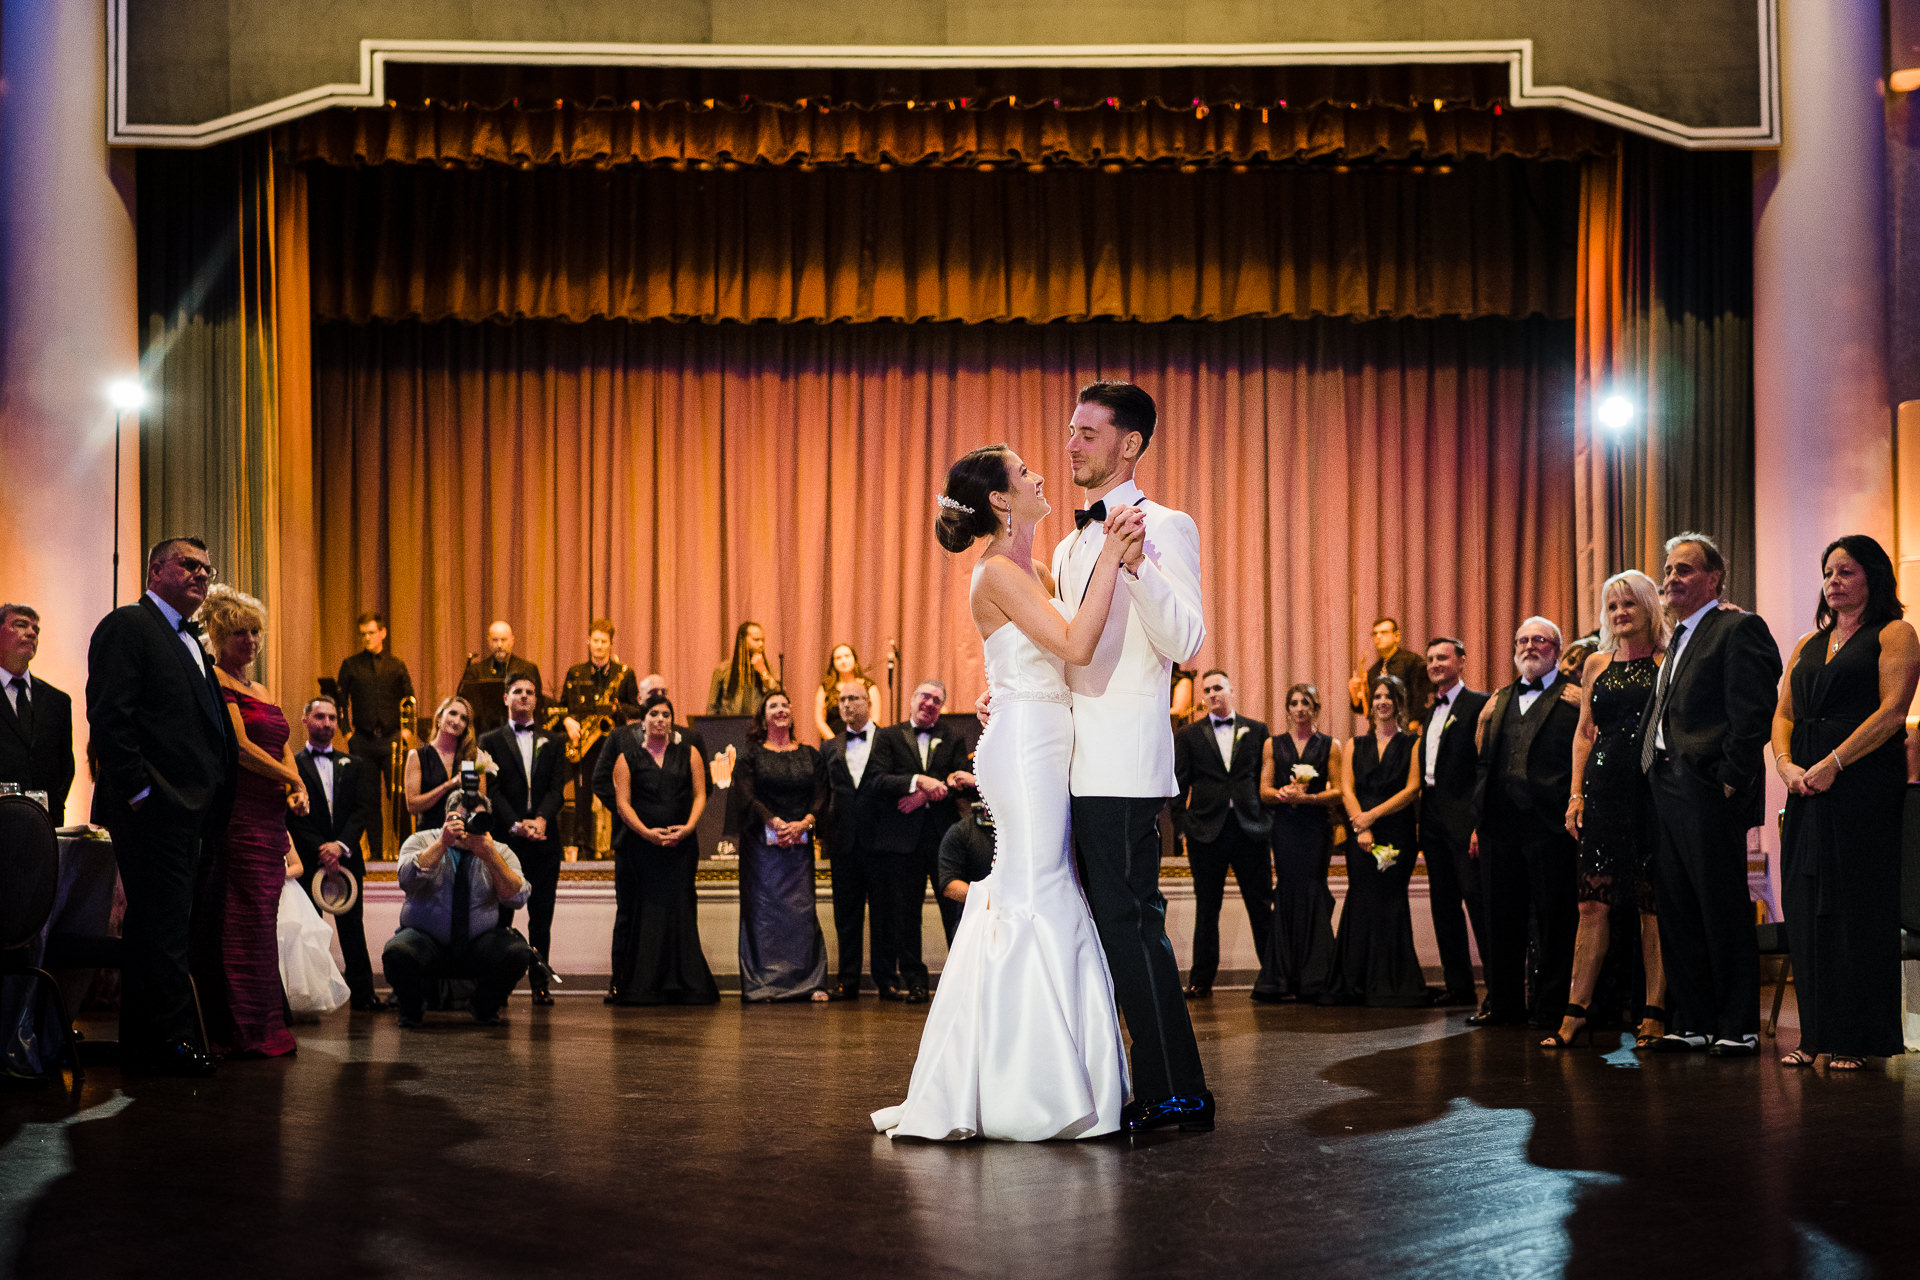 First Dance for the bride and groom during their bellevue wedding